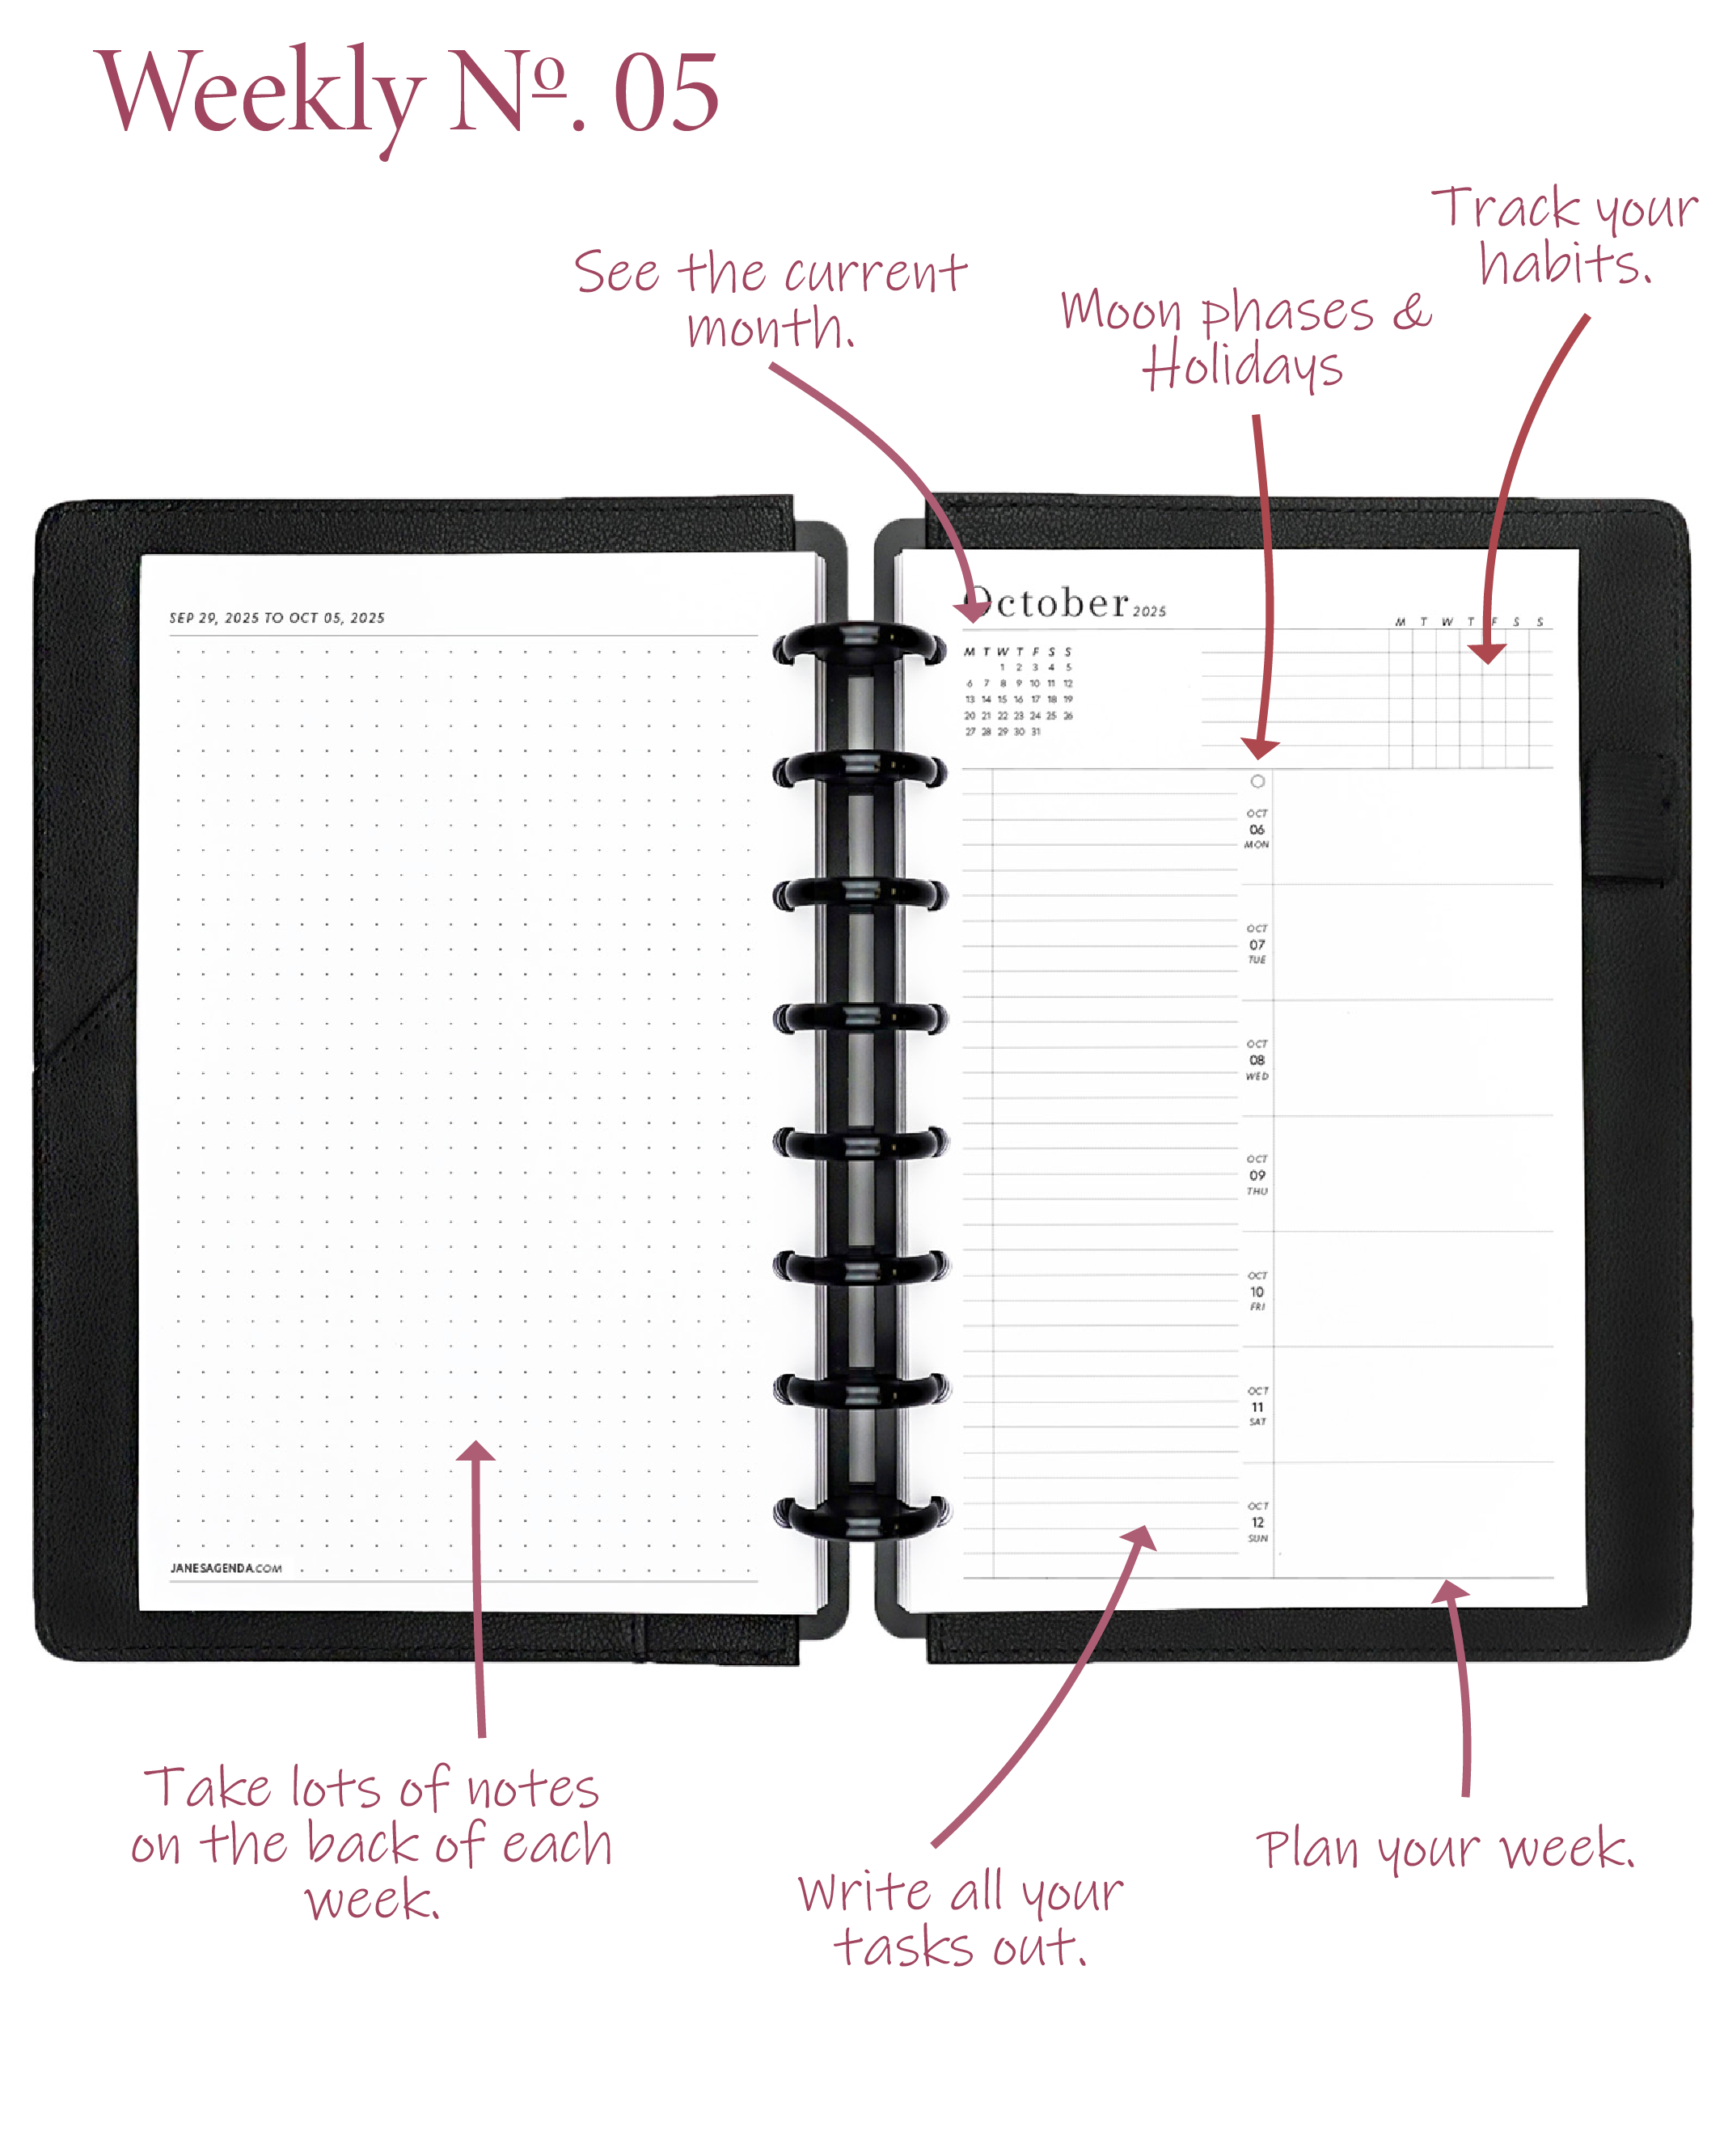 How to use the weekly planner insert 05